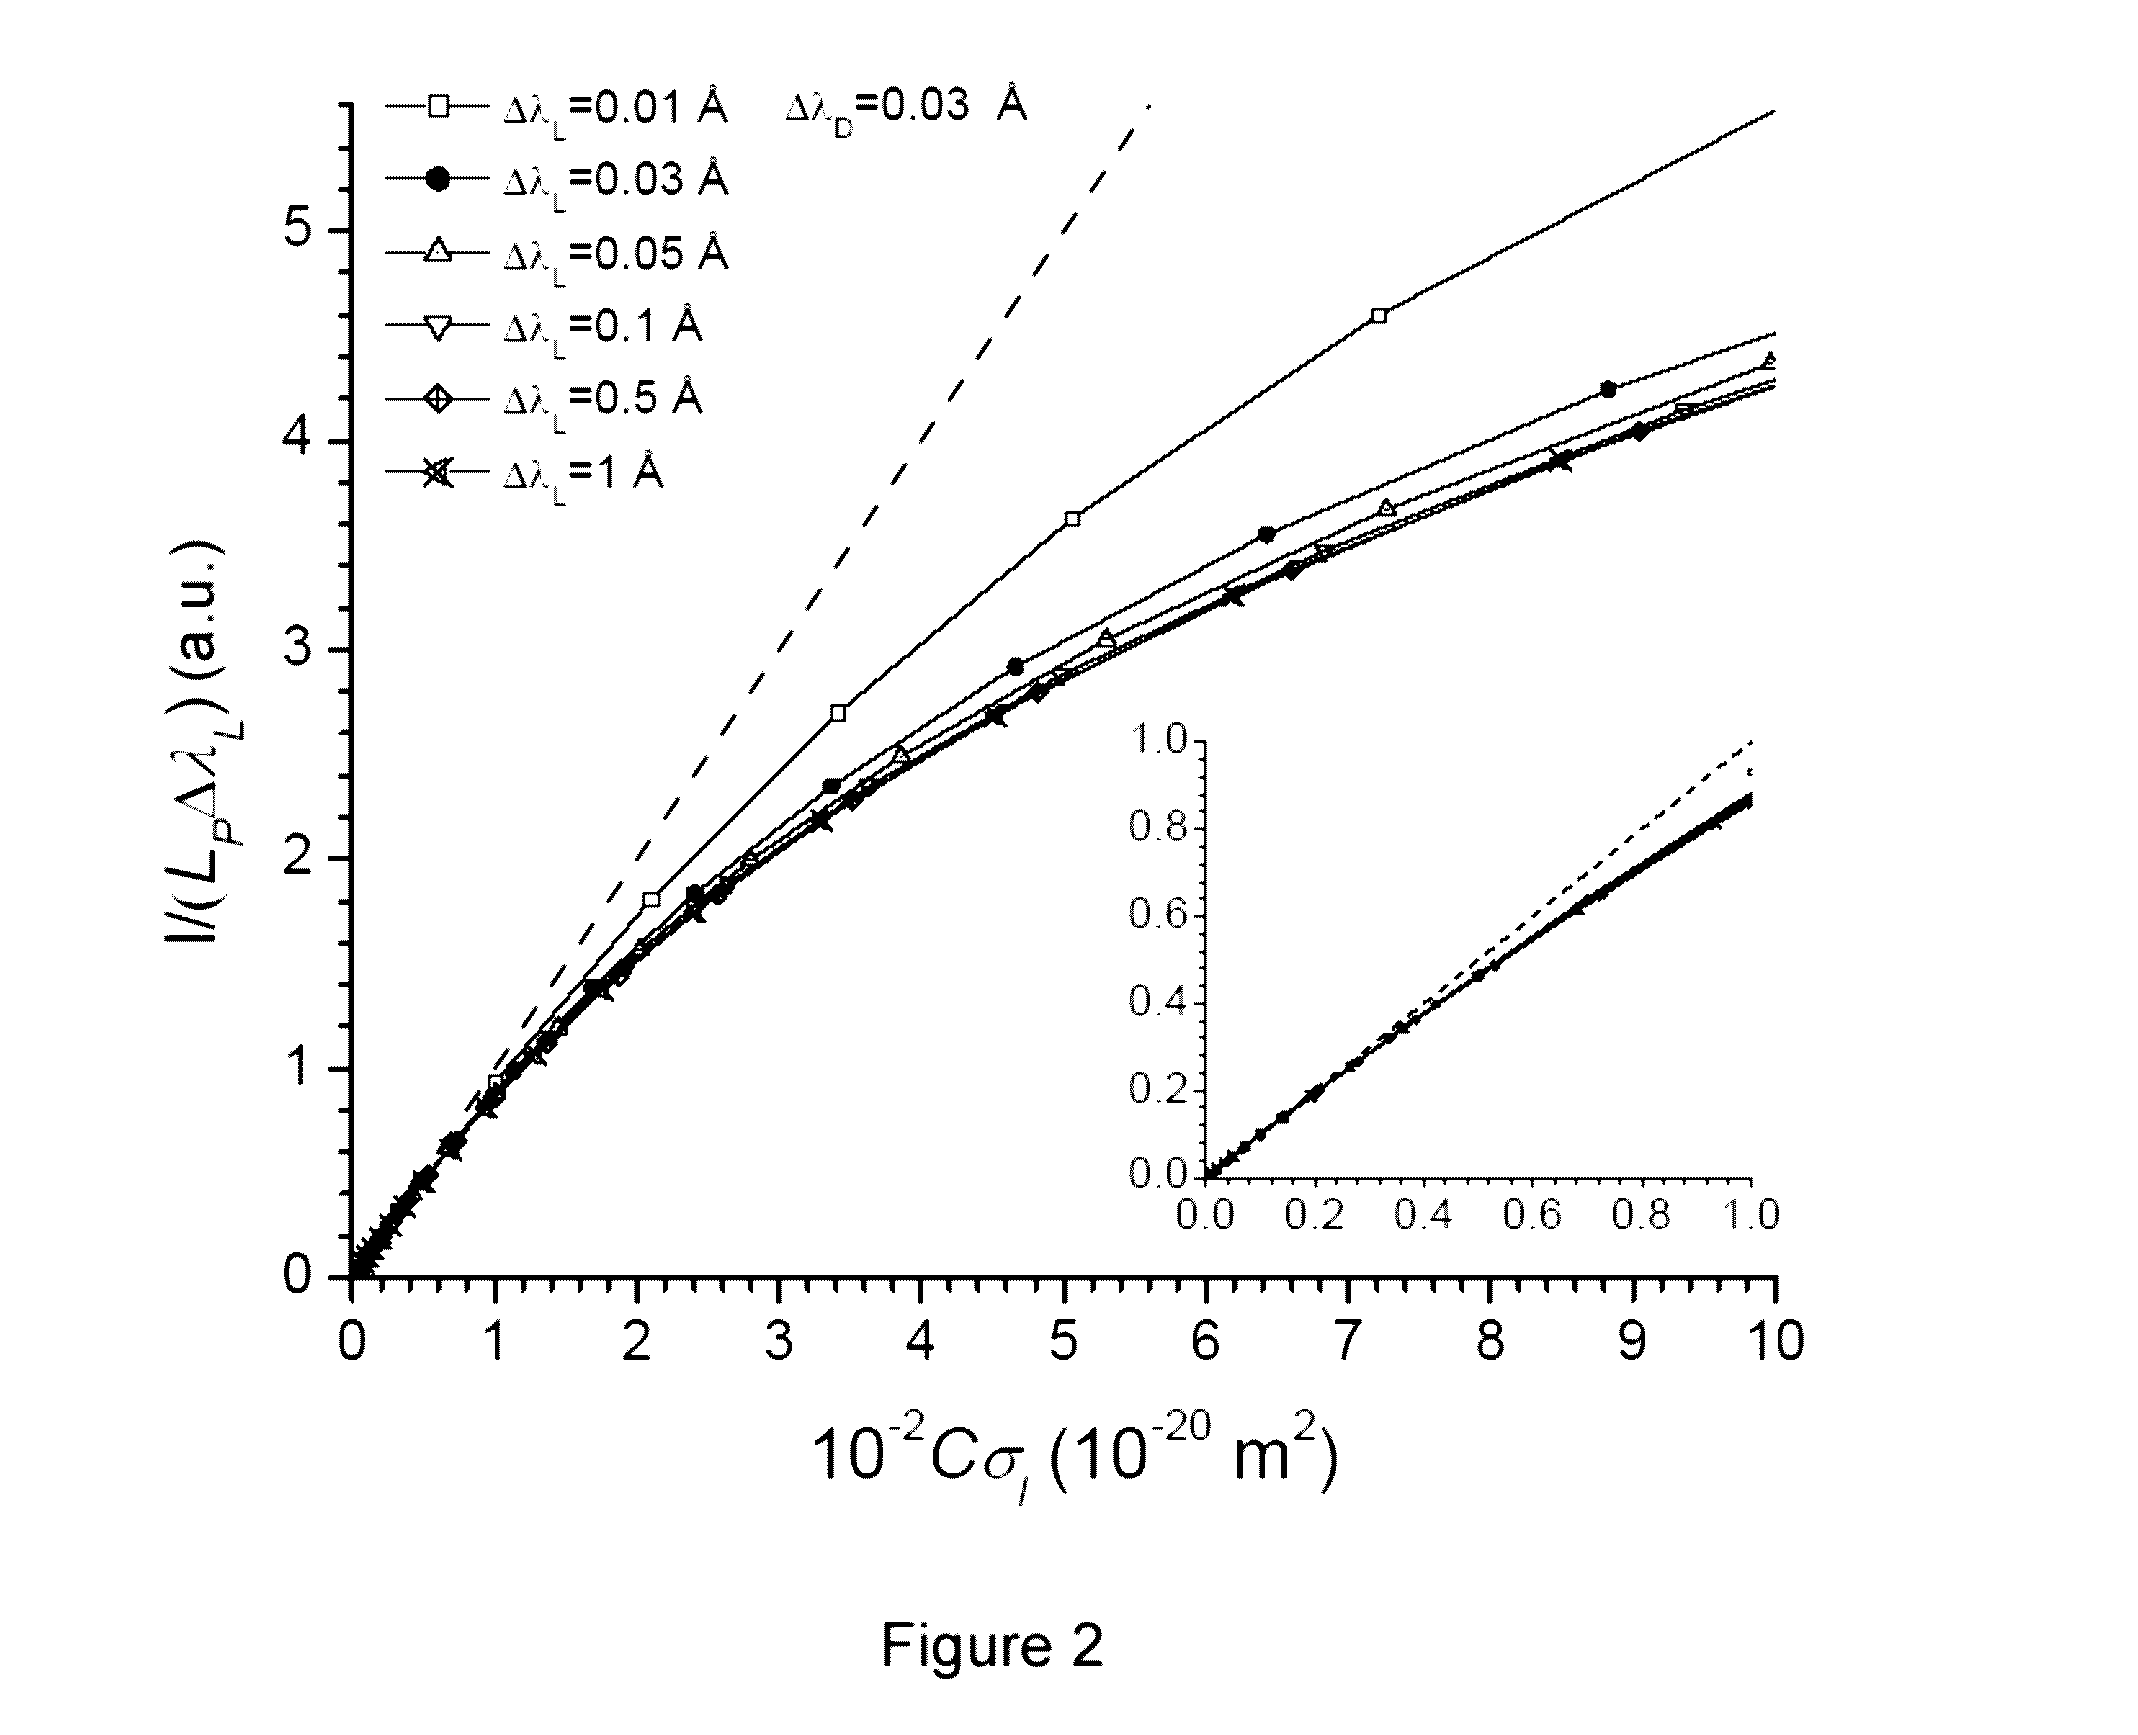 Quantitative analysis method for analyzing the elemental composition of materials by means of libs technique